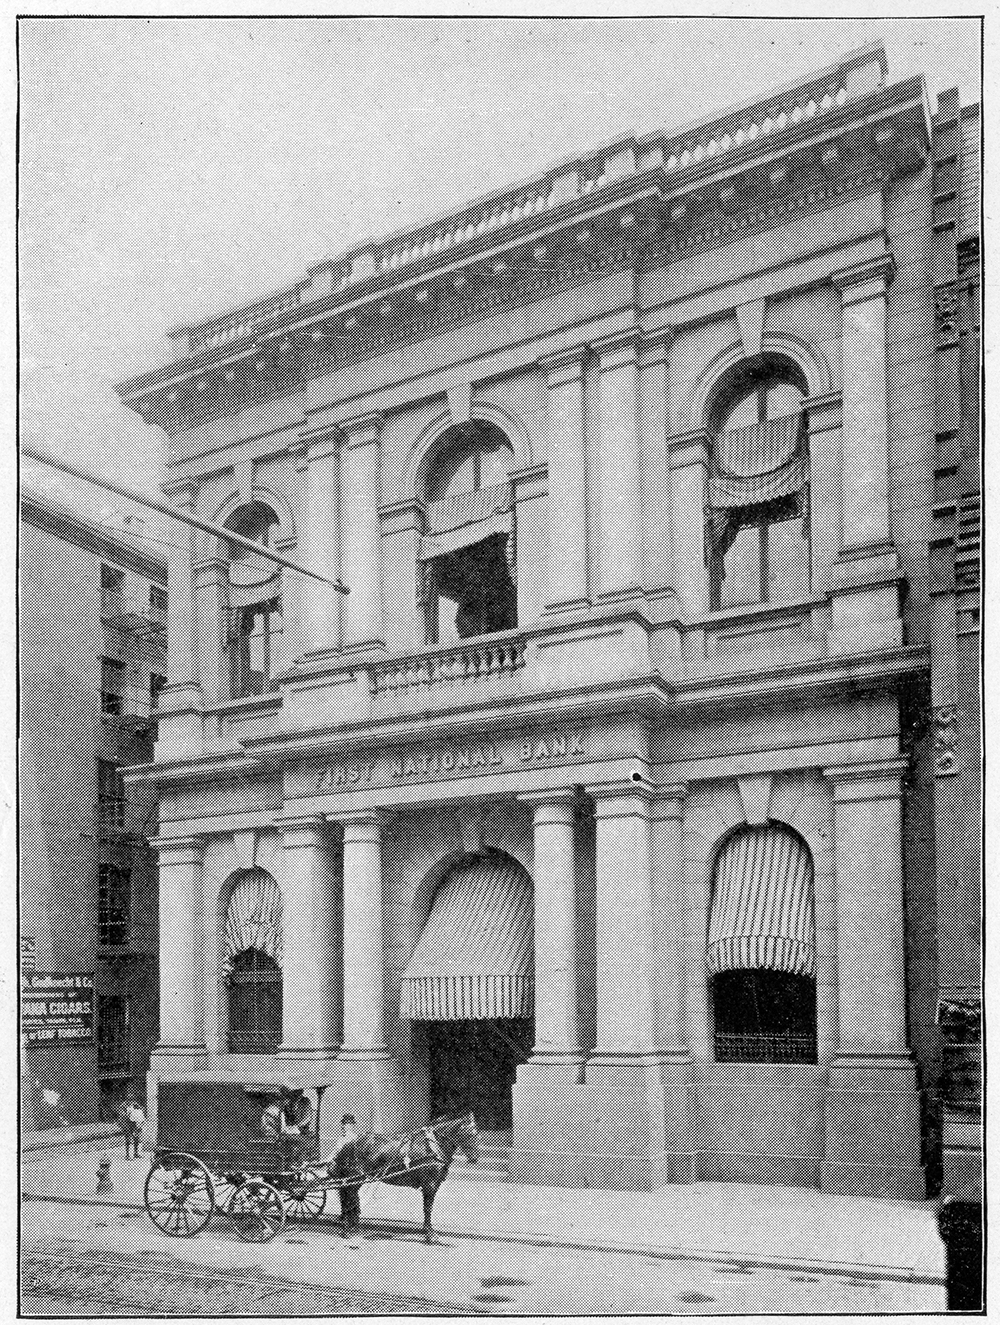 A two-story building with arched windows and entrance. A horse and wagon pass by in front of the building.